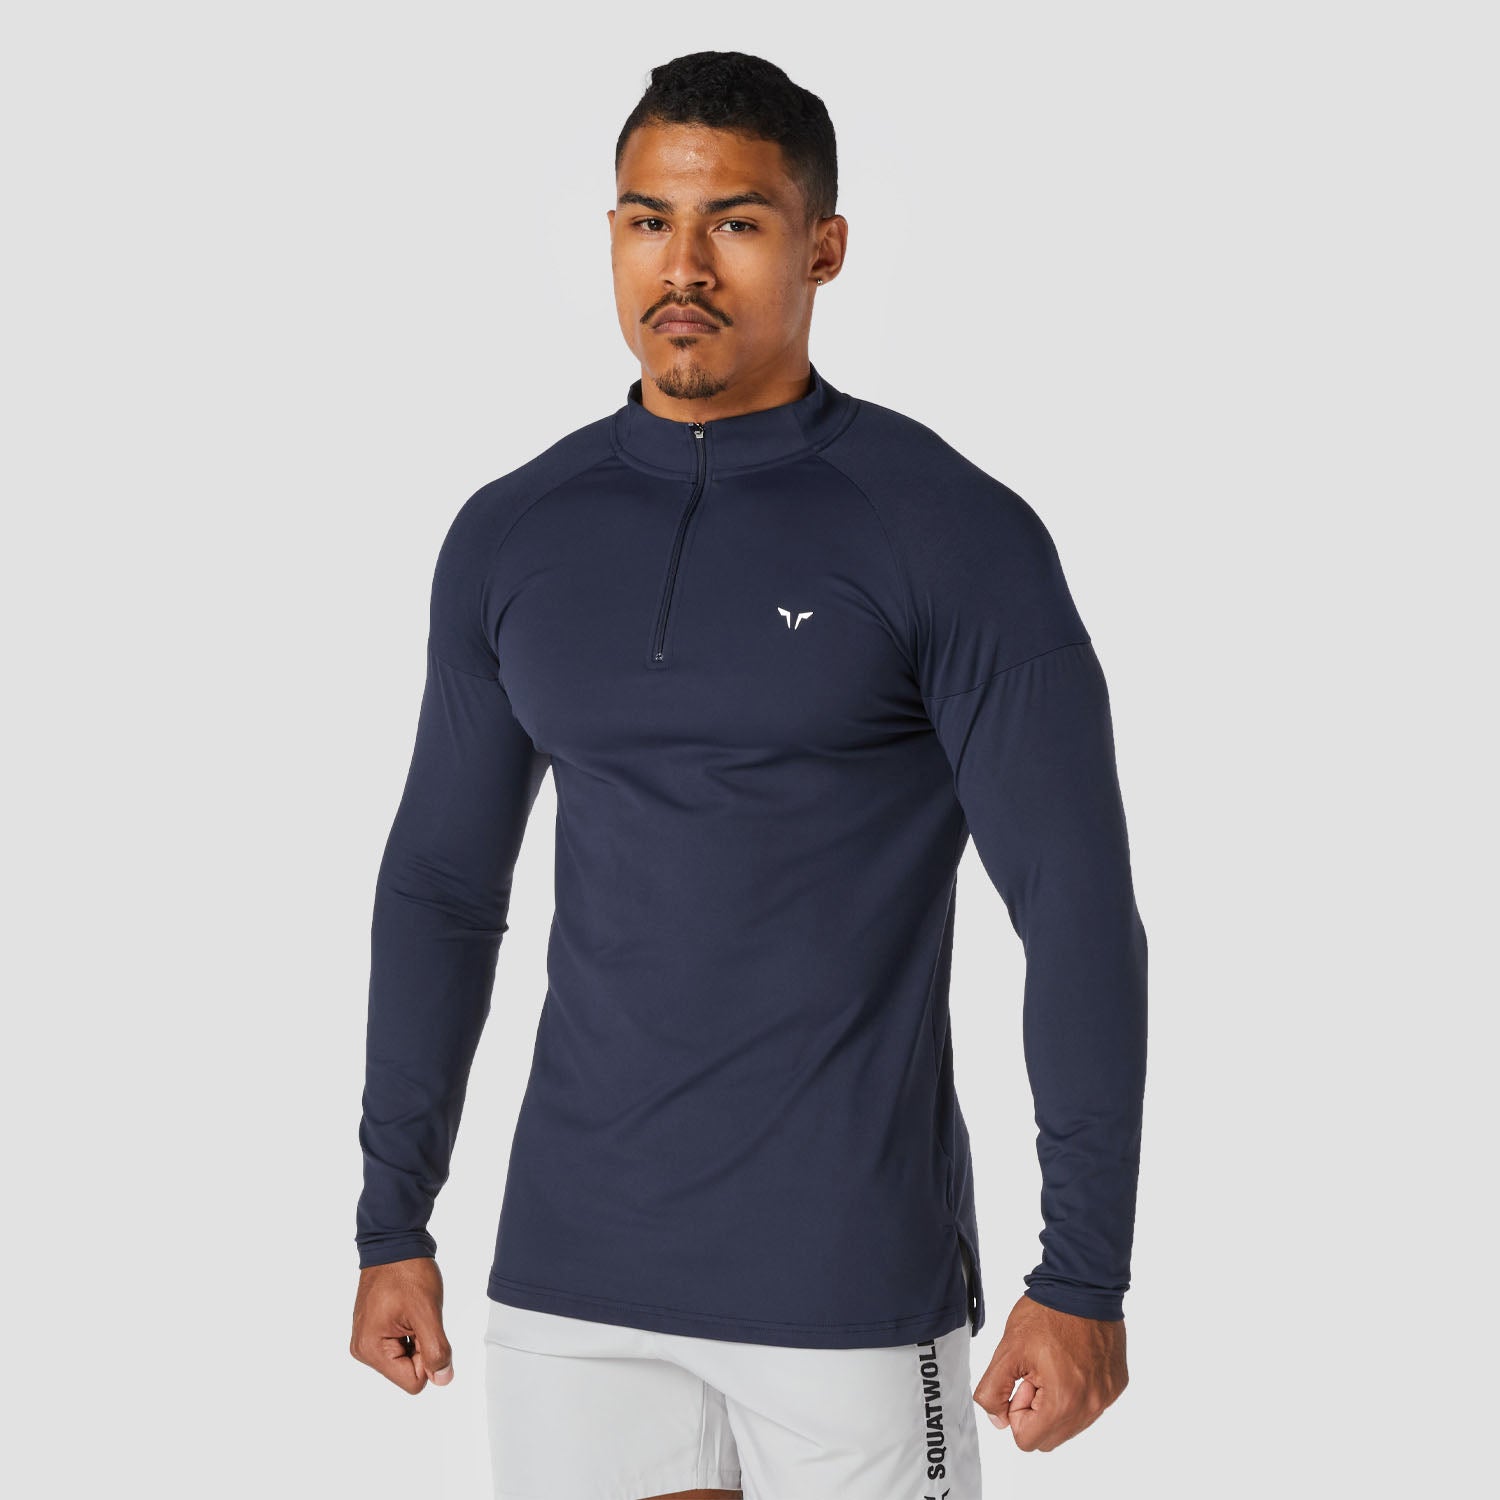 squatwolf-running-tops-for-men-core-running-top-navy-long-sleeves-gym-wear